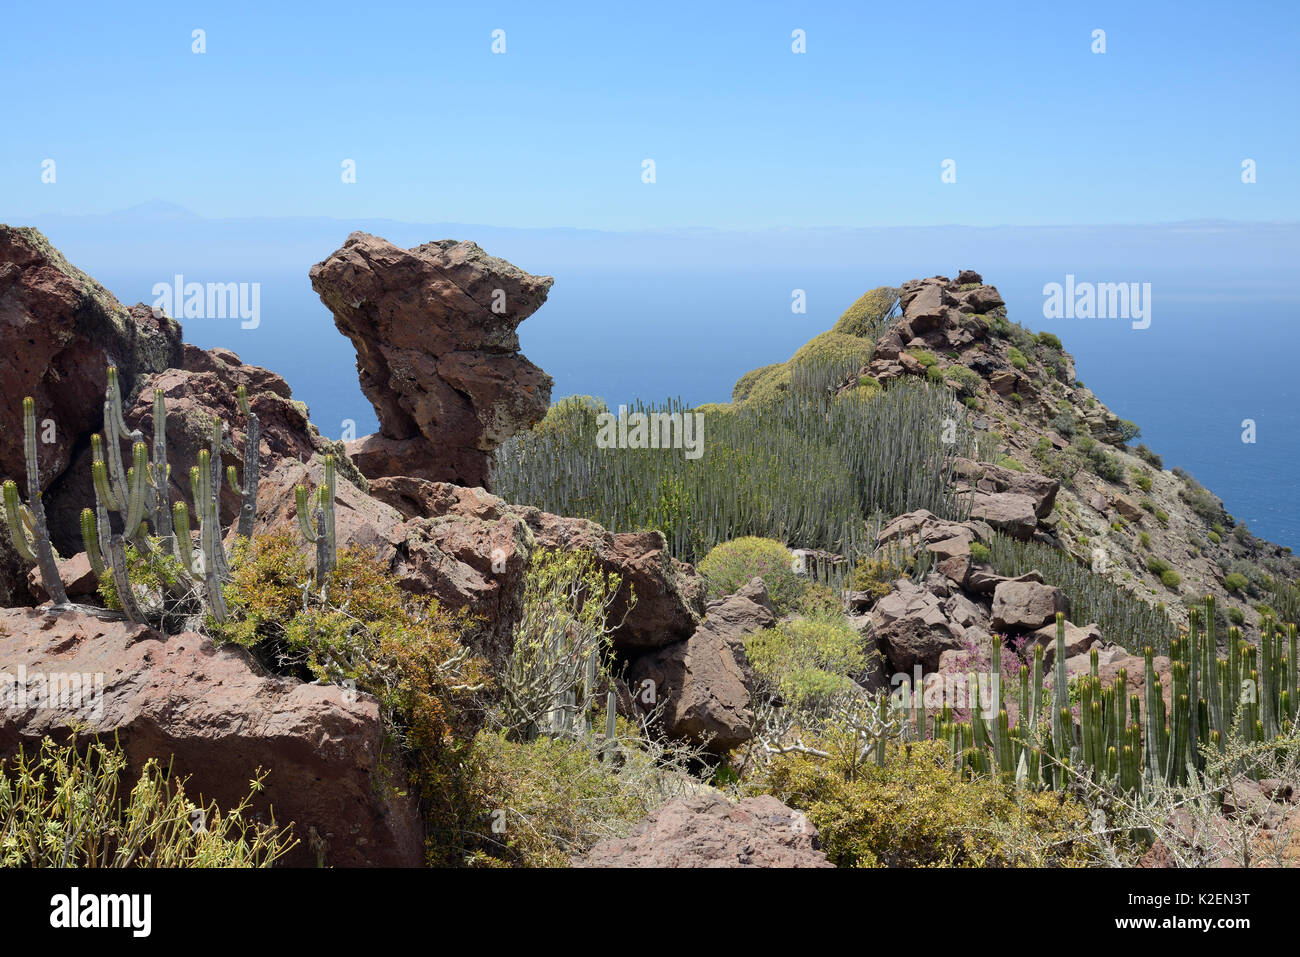 Canary Island spurge / Hercules club (Euphorbia canariensis) stands and other Euphorbias among volcanic rocks in the coastal mountains of the Tamadaba Natural Park. Gran Canaria UNESCO Biosphere Reserve, Gran Canaria, Canary Islands. June 2016. Stock Photo